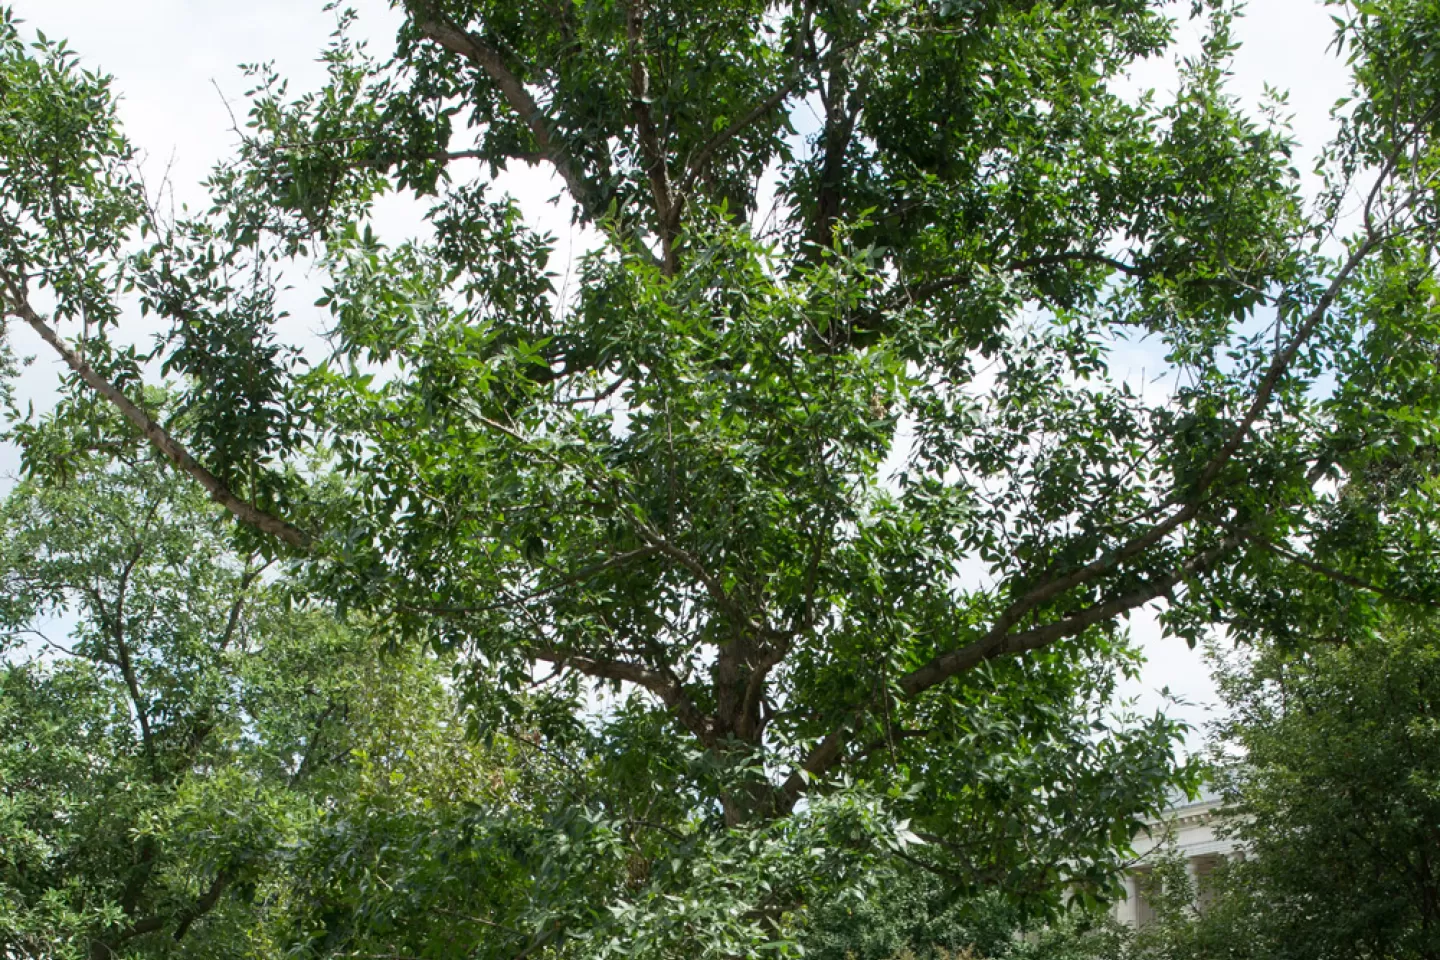 The Rep. Walter Capps tree on the U.S. Capitol Grounds during summer.